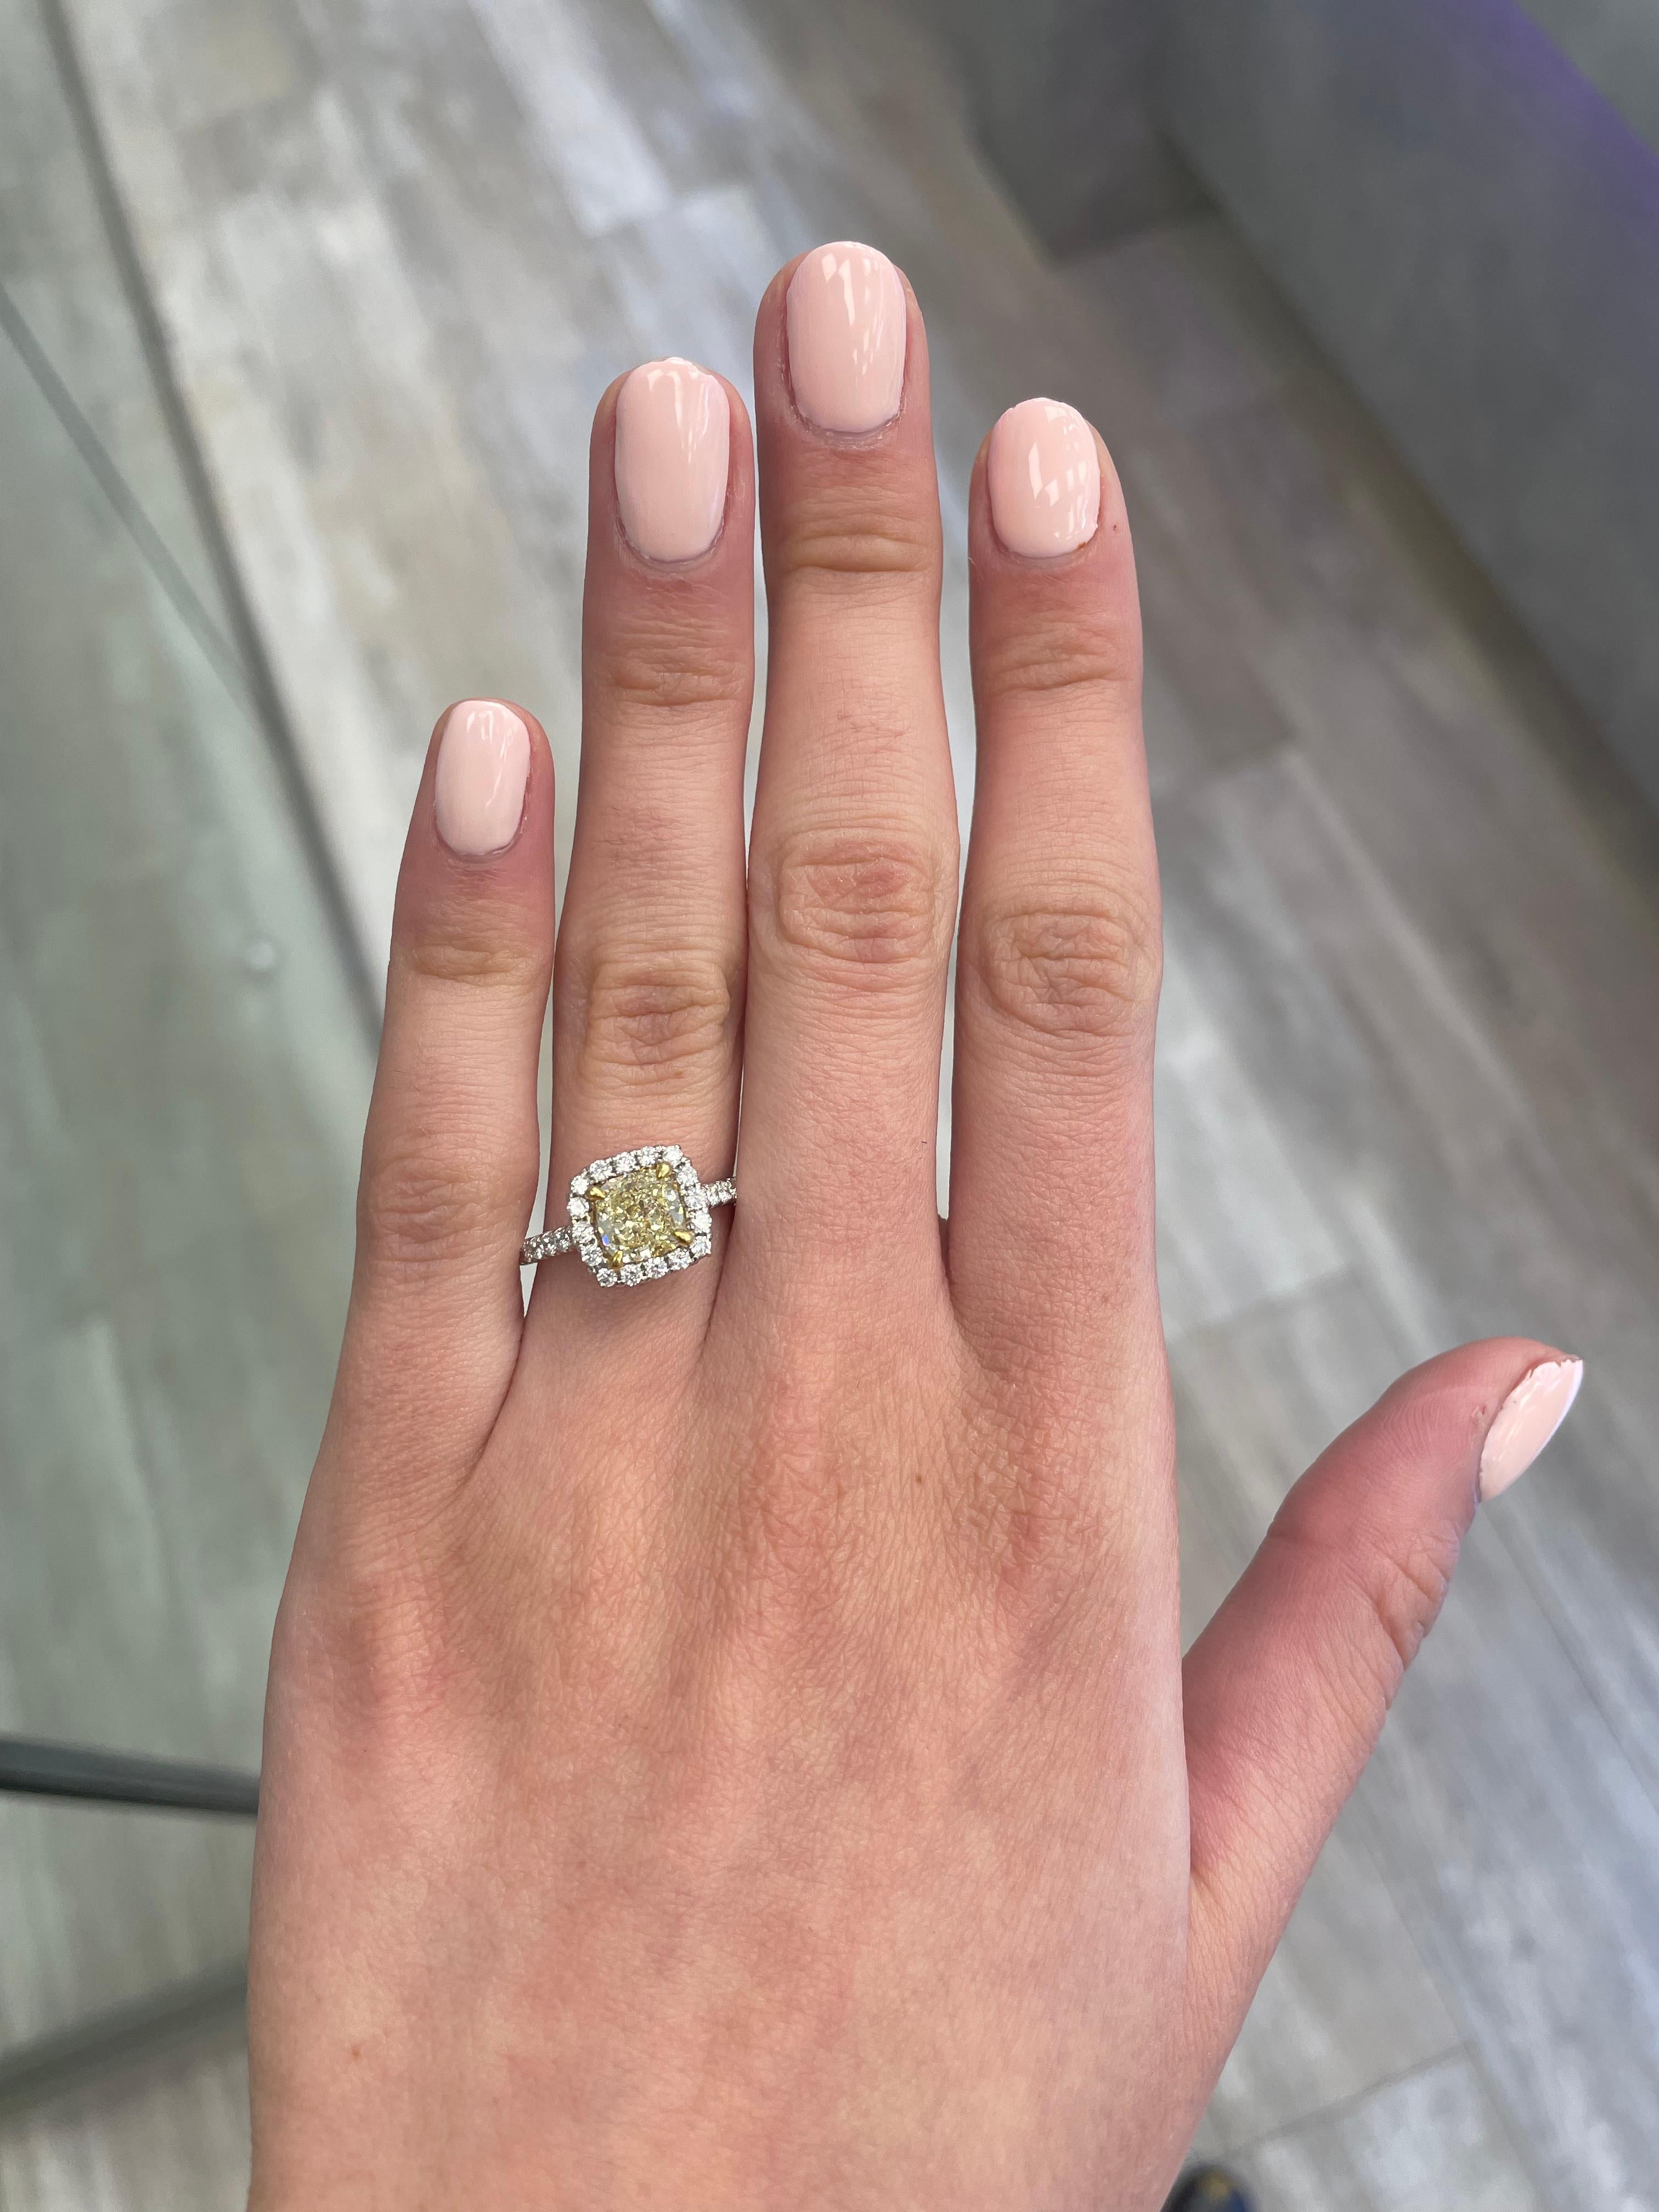 Stunning modern EGL certified yellow diamond with halo ring, two-tone 18k yellow and white gold. By Alexander Beverly Hills
2.31 carats total diamond weight.
1.72 carat cushion cut Fancy Yellow color and VS1 clarity diamond, EGL graded. Complimented